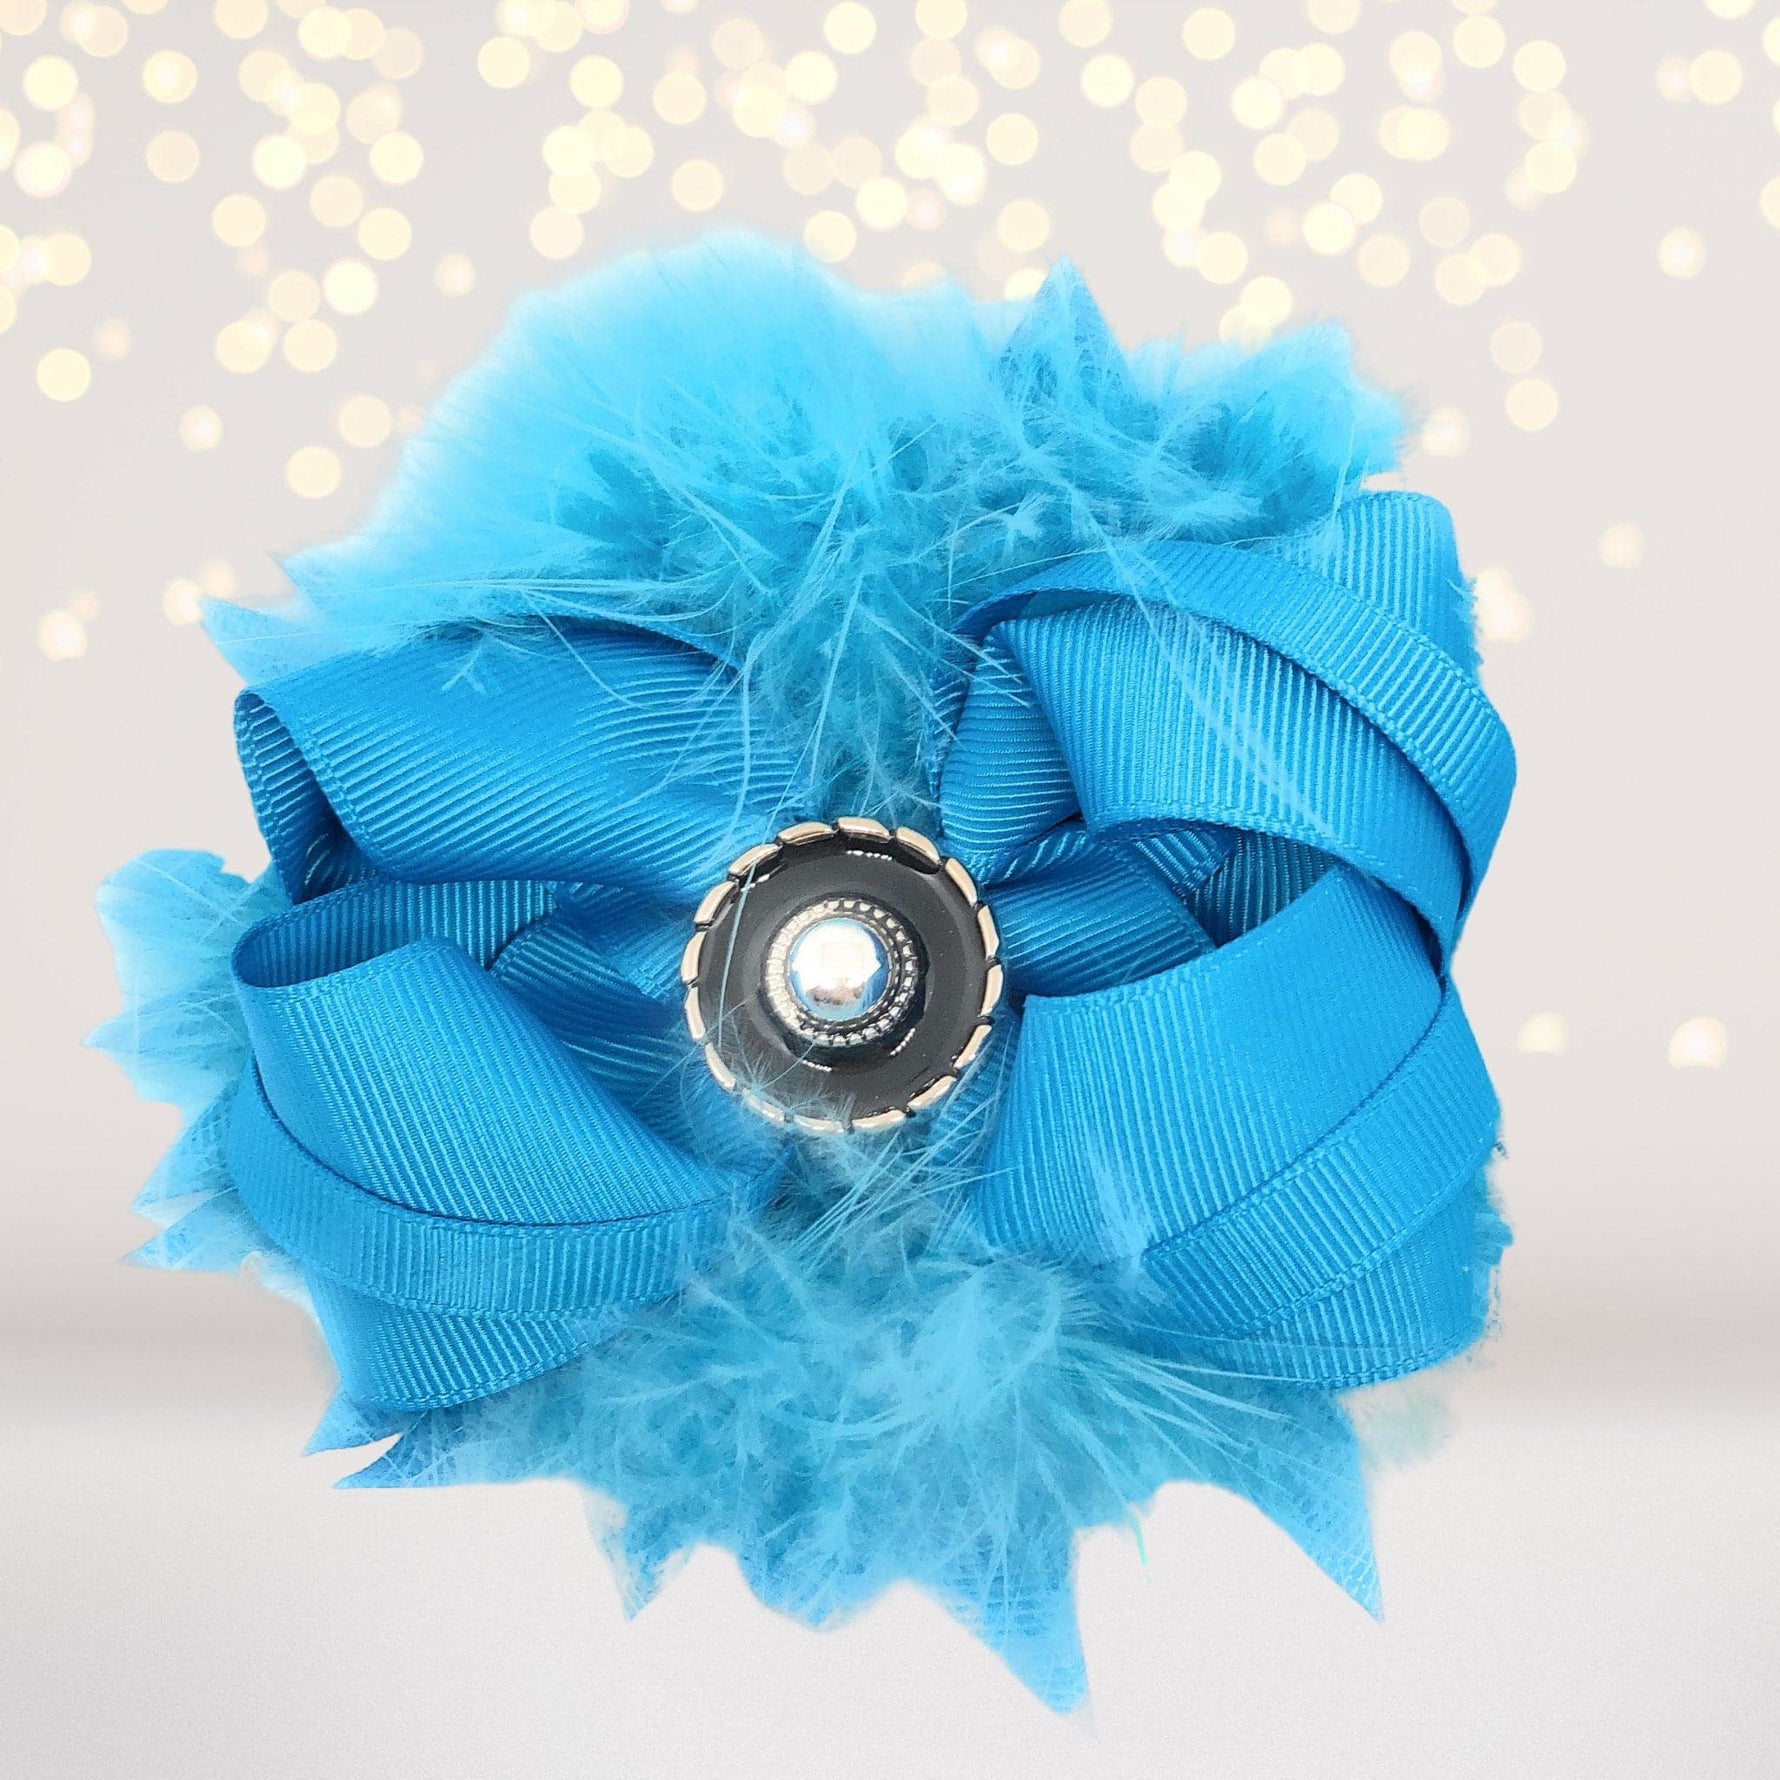 Hair Bow - Marabou Feather Flower Shaped Hair Bow, Marabou Boutique Bow